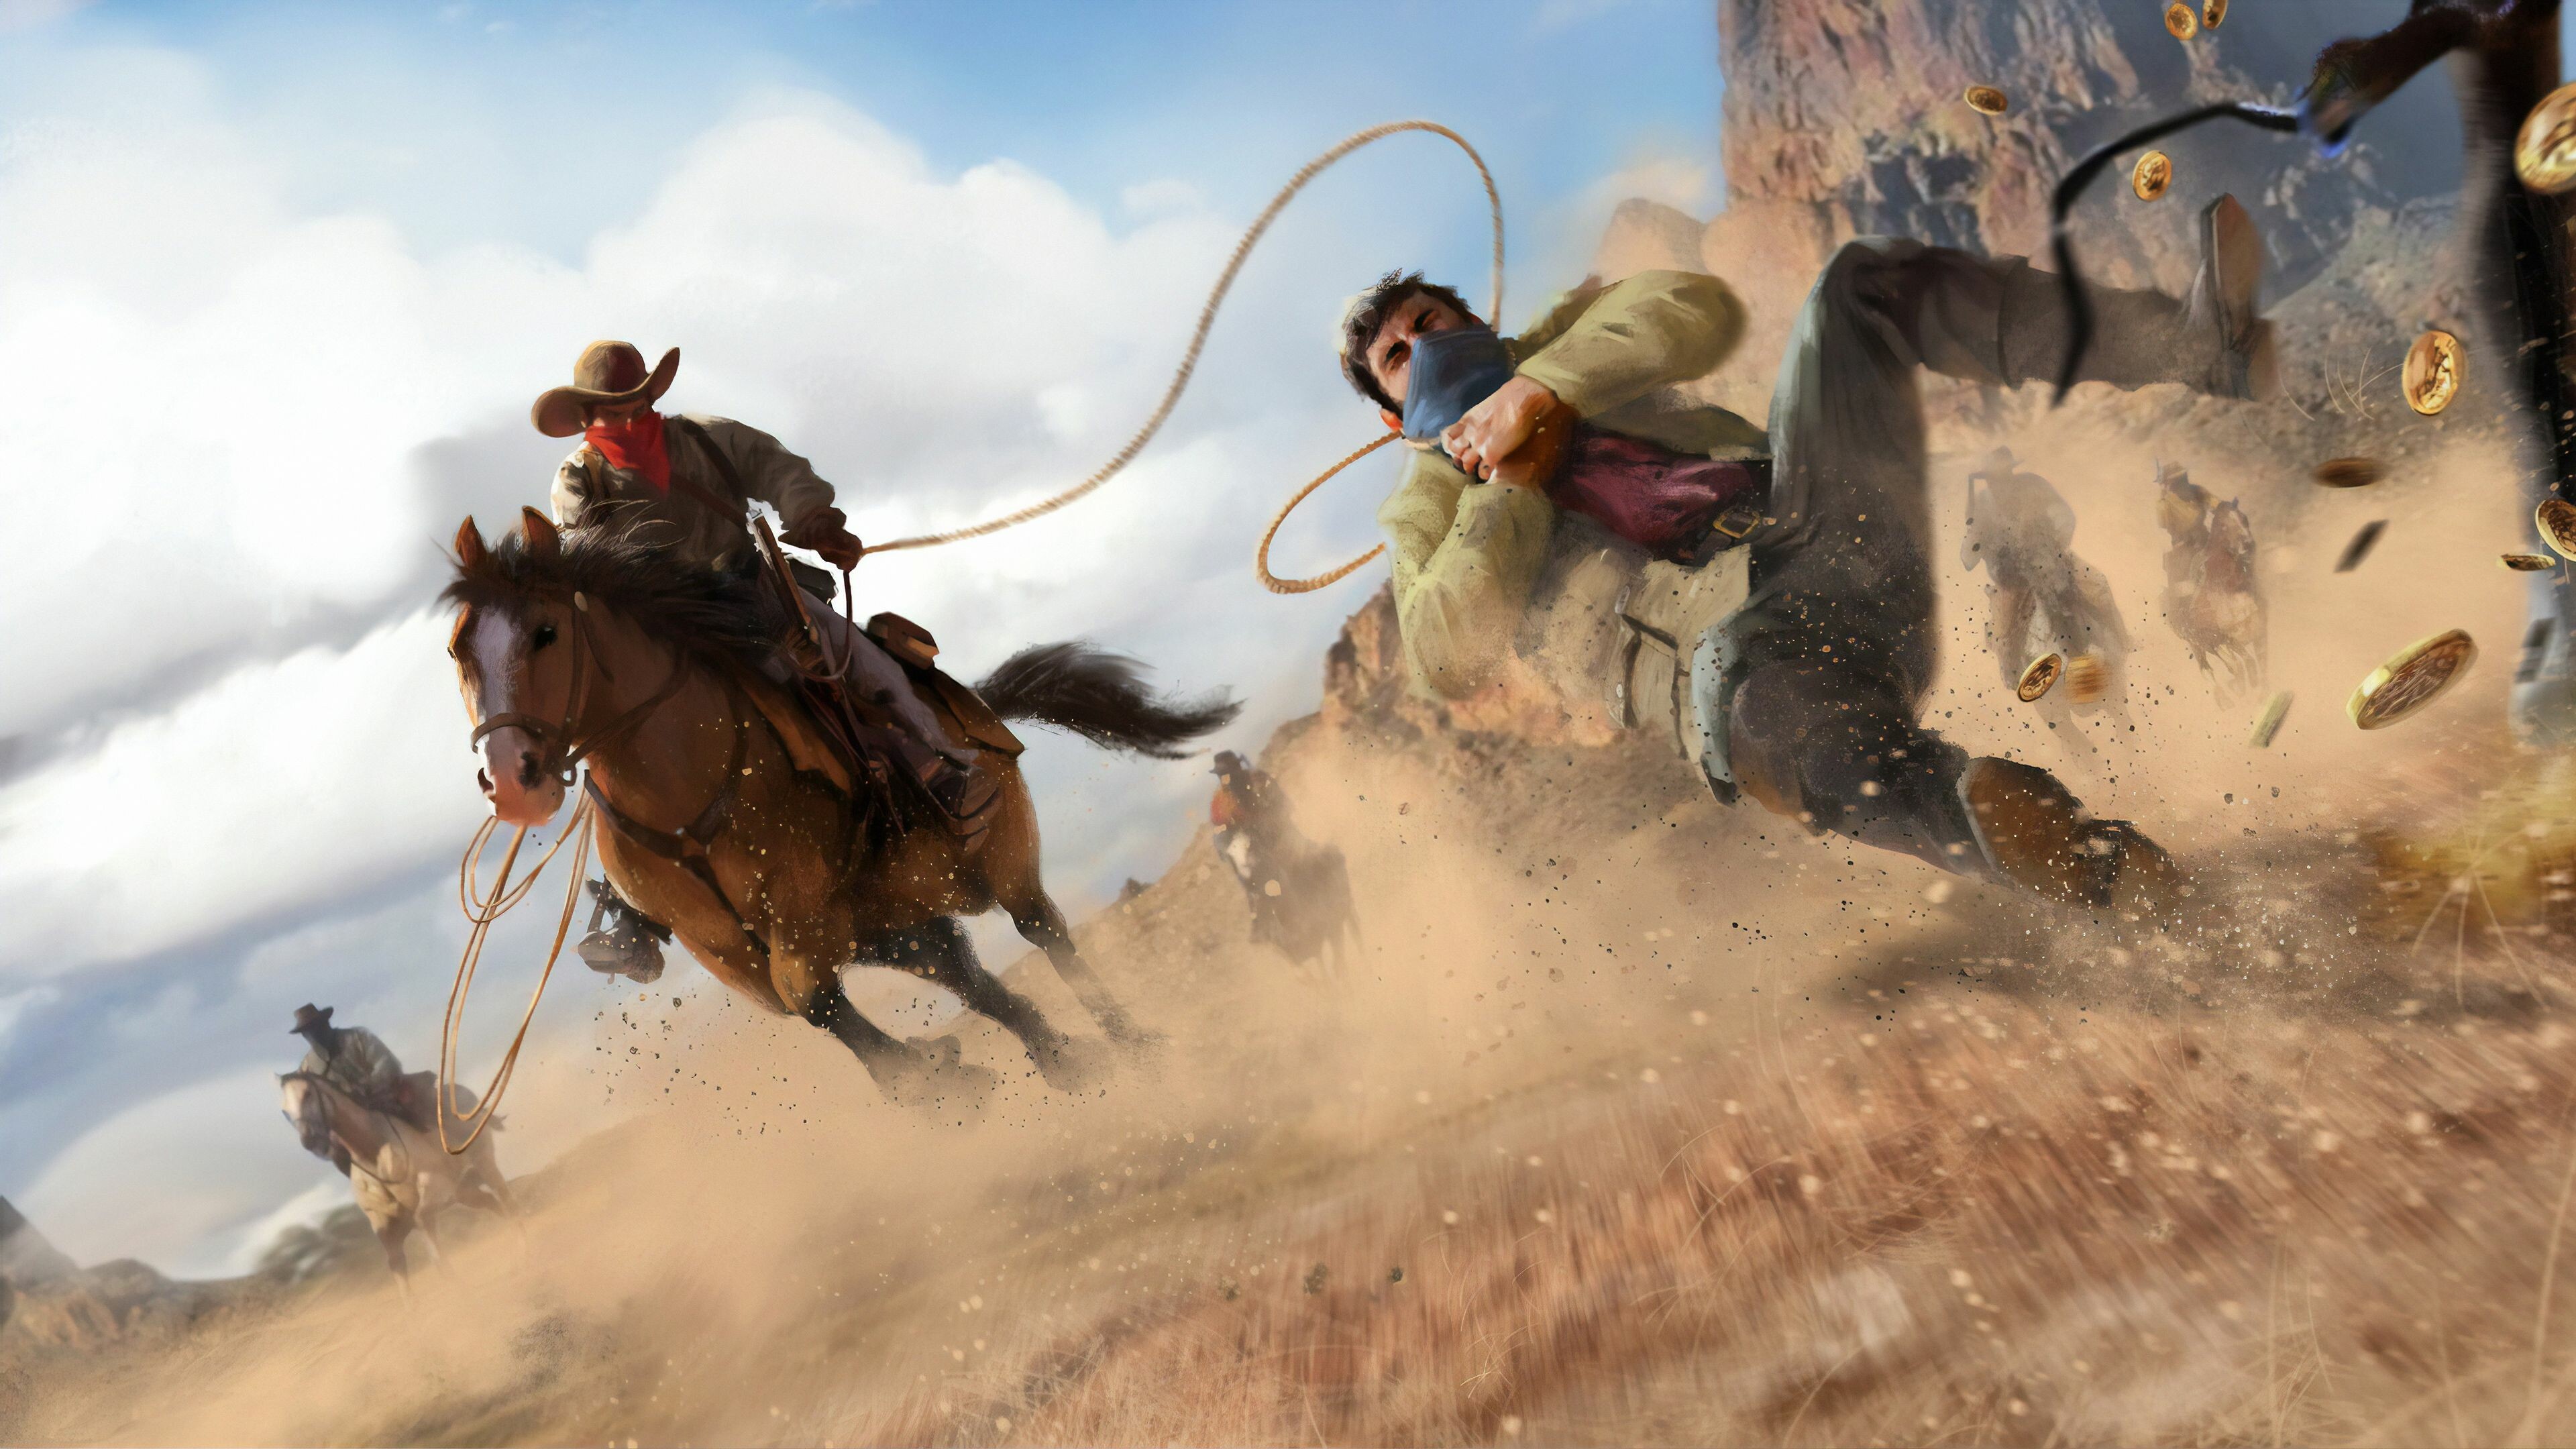 Red Dead Redemption: One of the most expensive video games ever made. 3840x2160 4K Wallpaper.